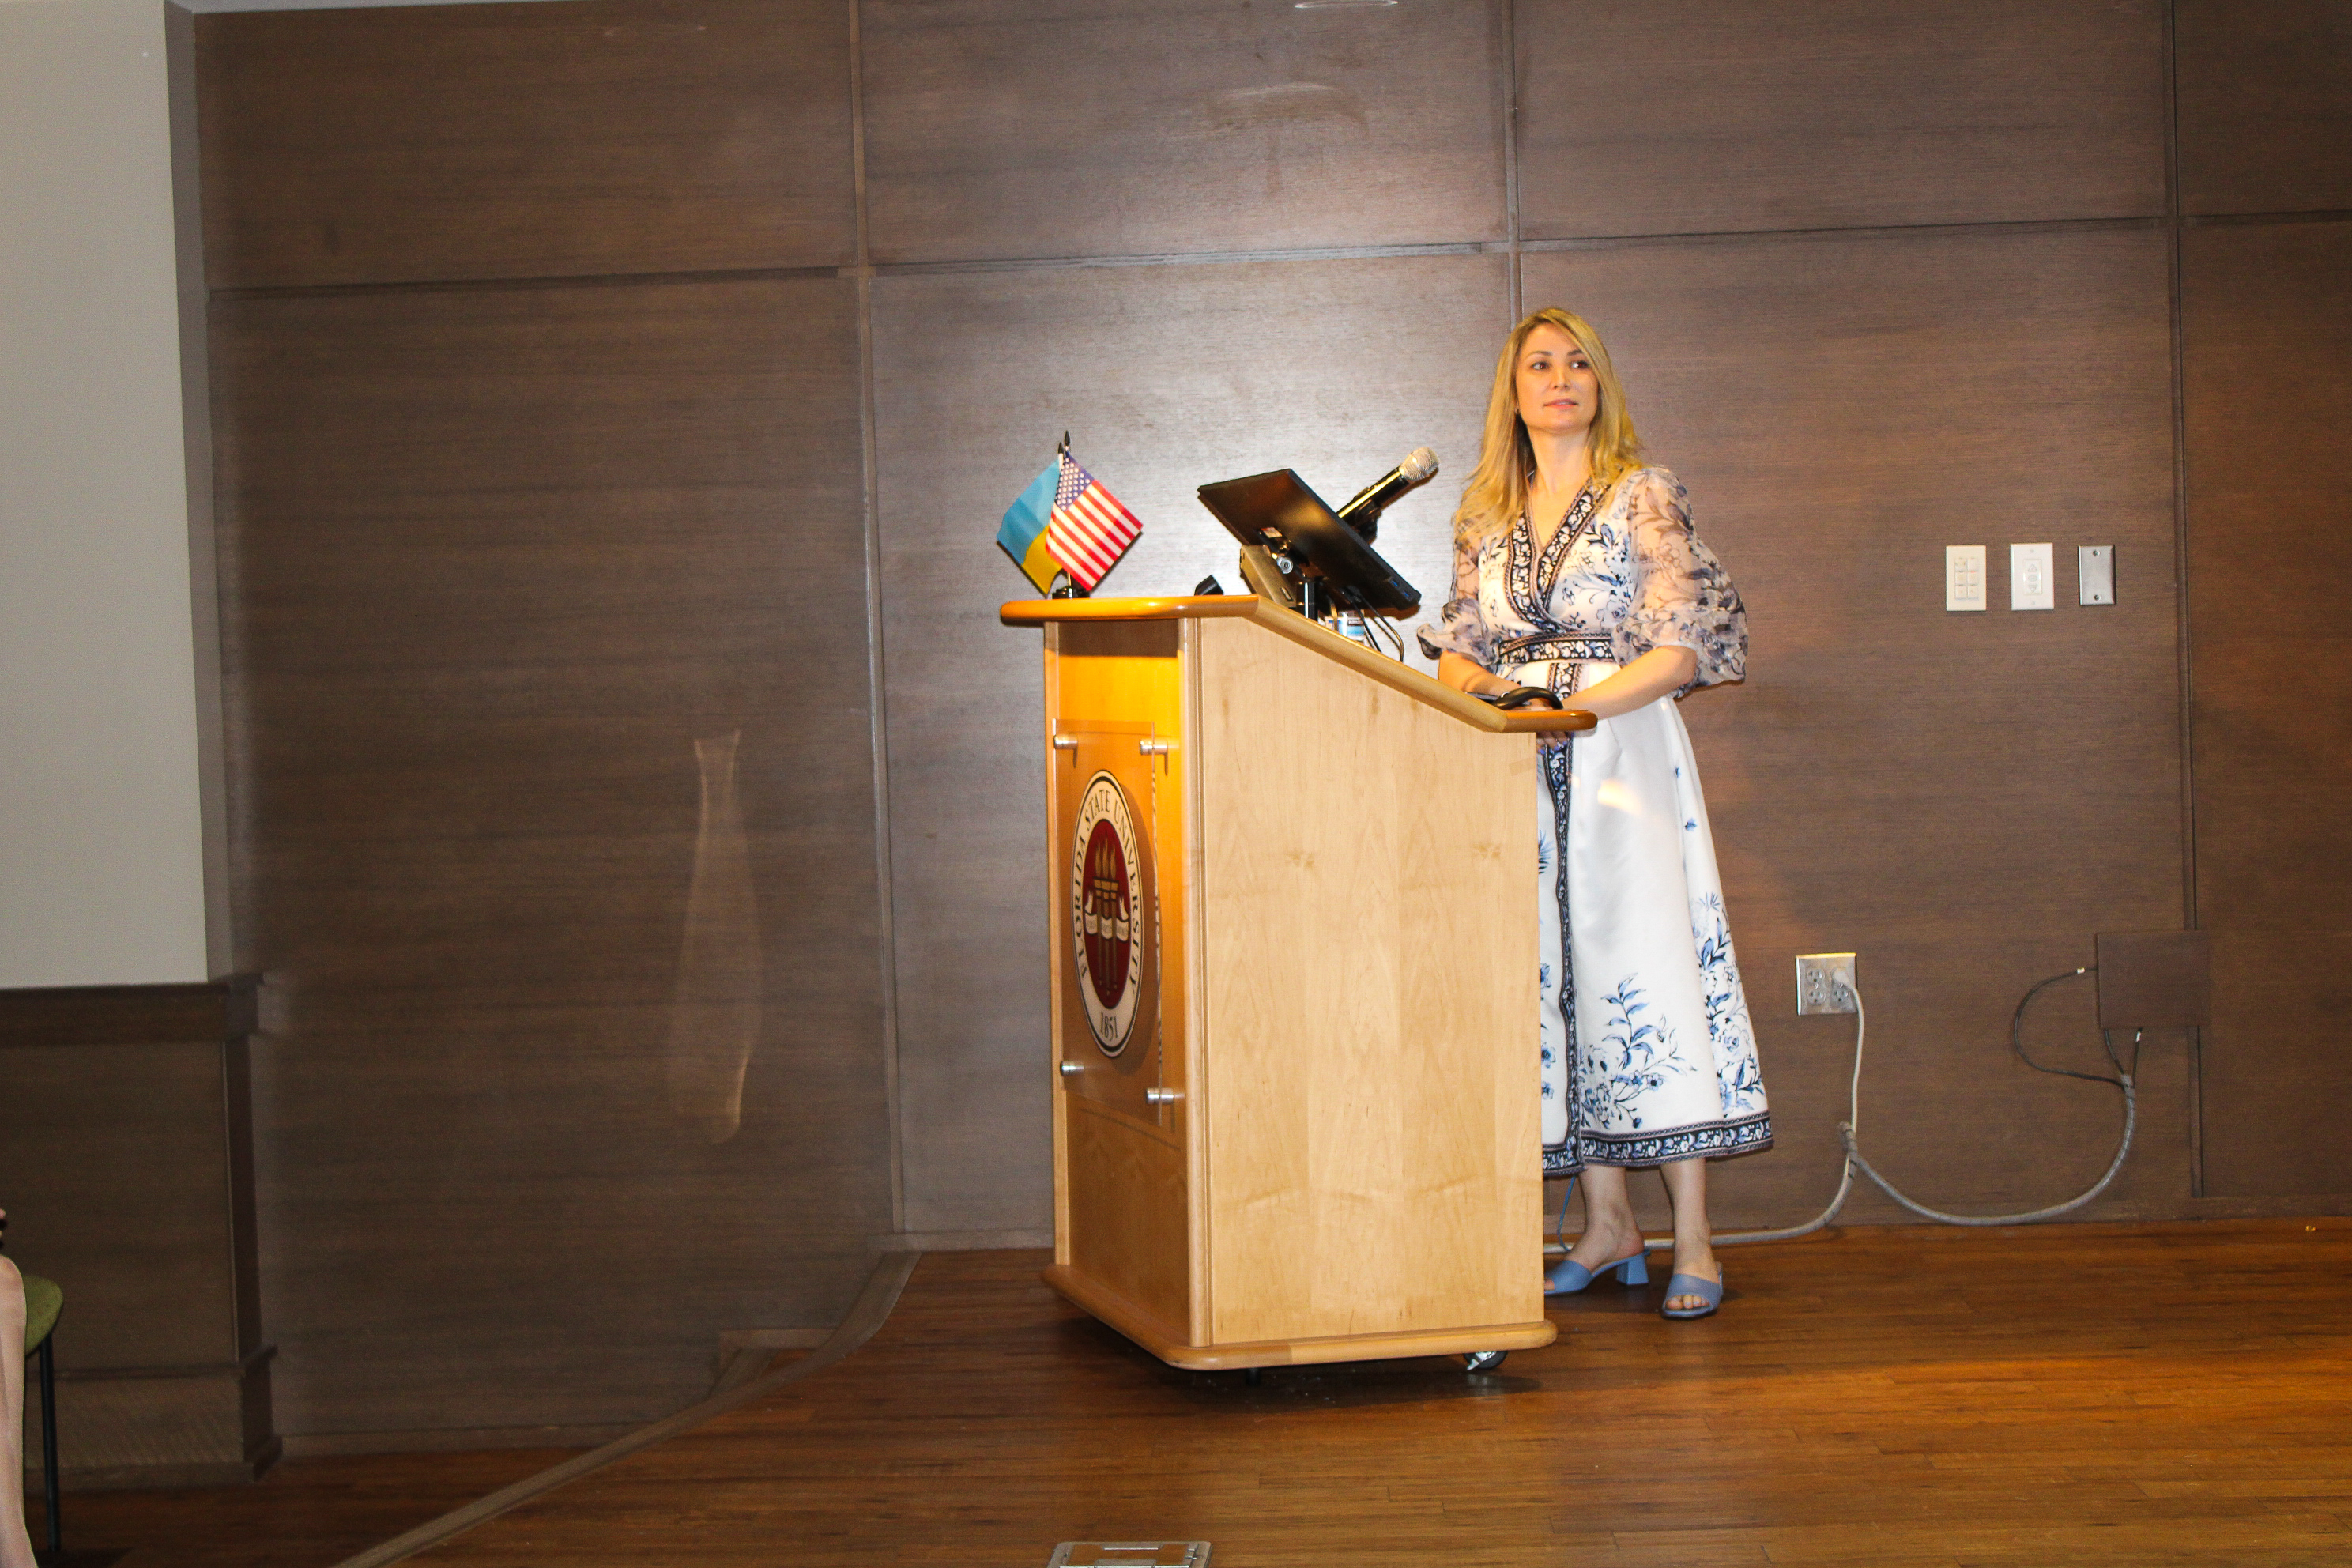 "Dr. Anna Romanova standing behind a podium during a lecture"